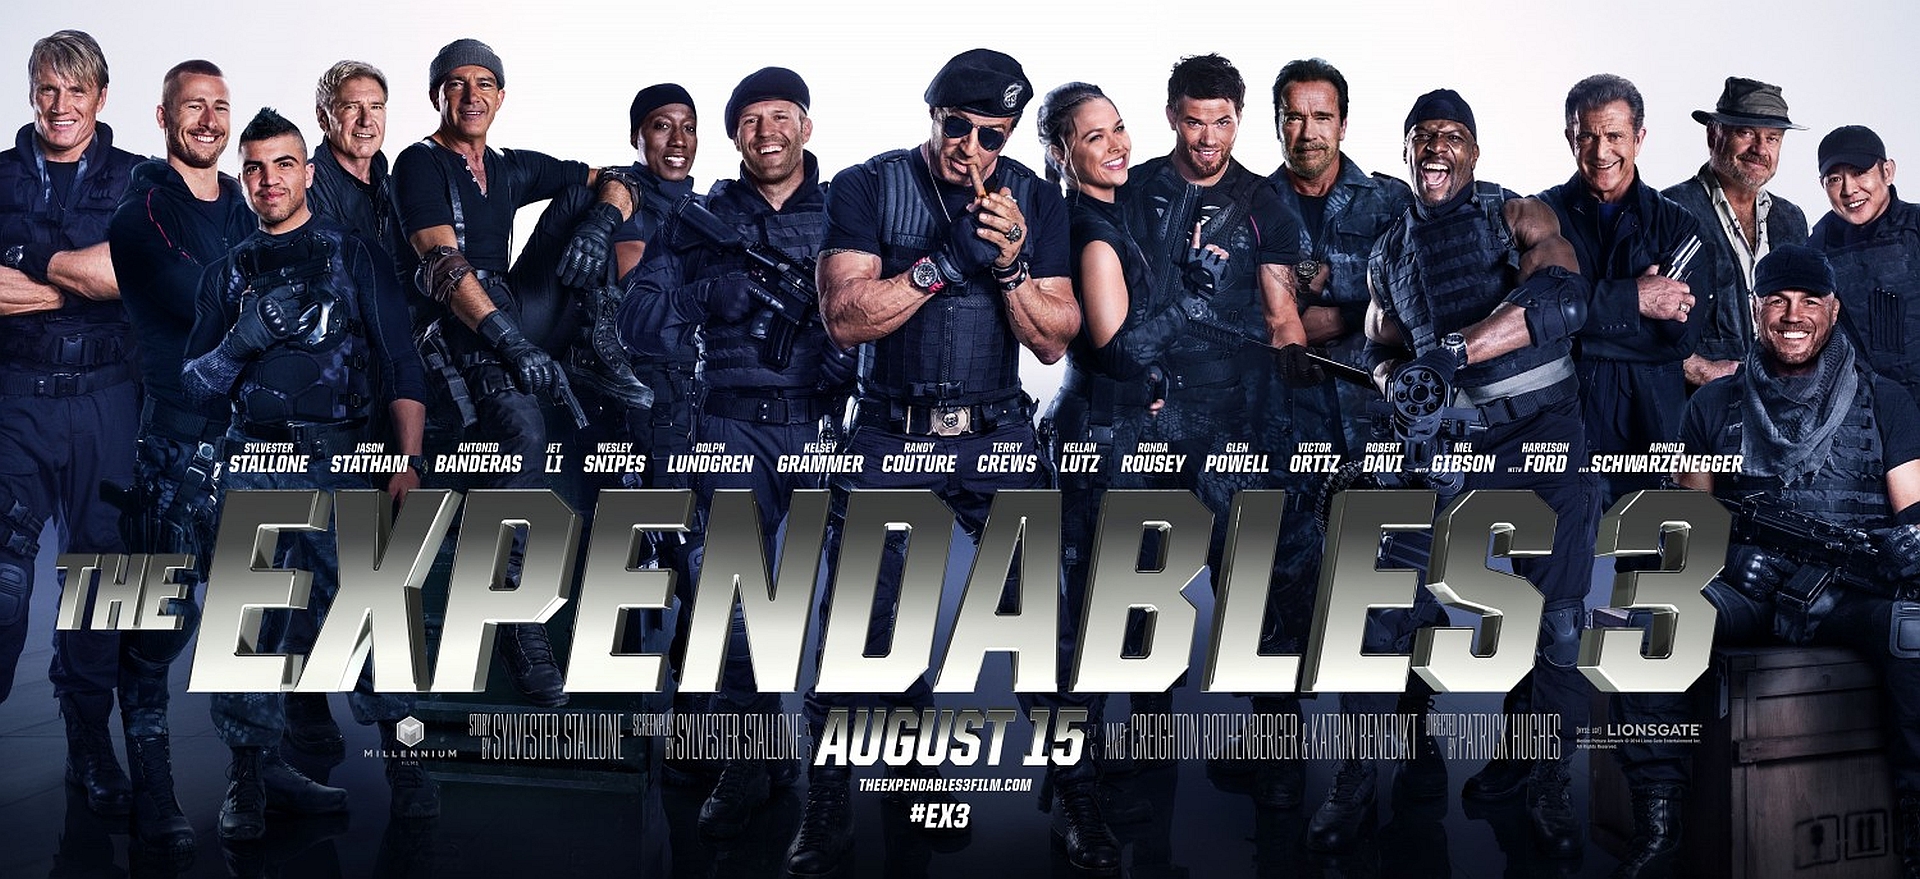 Download mobile wallpaper The Expendables 3, Antonio Banderas, Glen Powell, Kellan Lutz, Mel Gibson, Wesley Snipes, Ronda Rousey, Terry Crews, Harrison Ford, Sylvester Stallone, Arnold Schwarzenegger, The Expendables, Jason Statham, Movie for free.